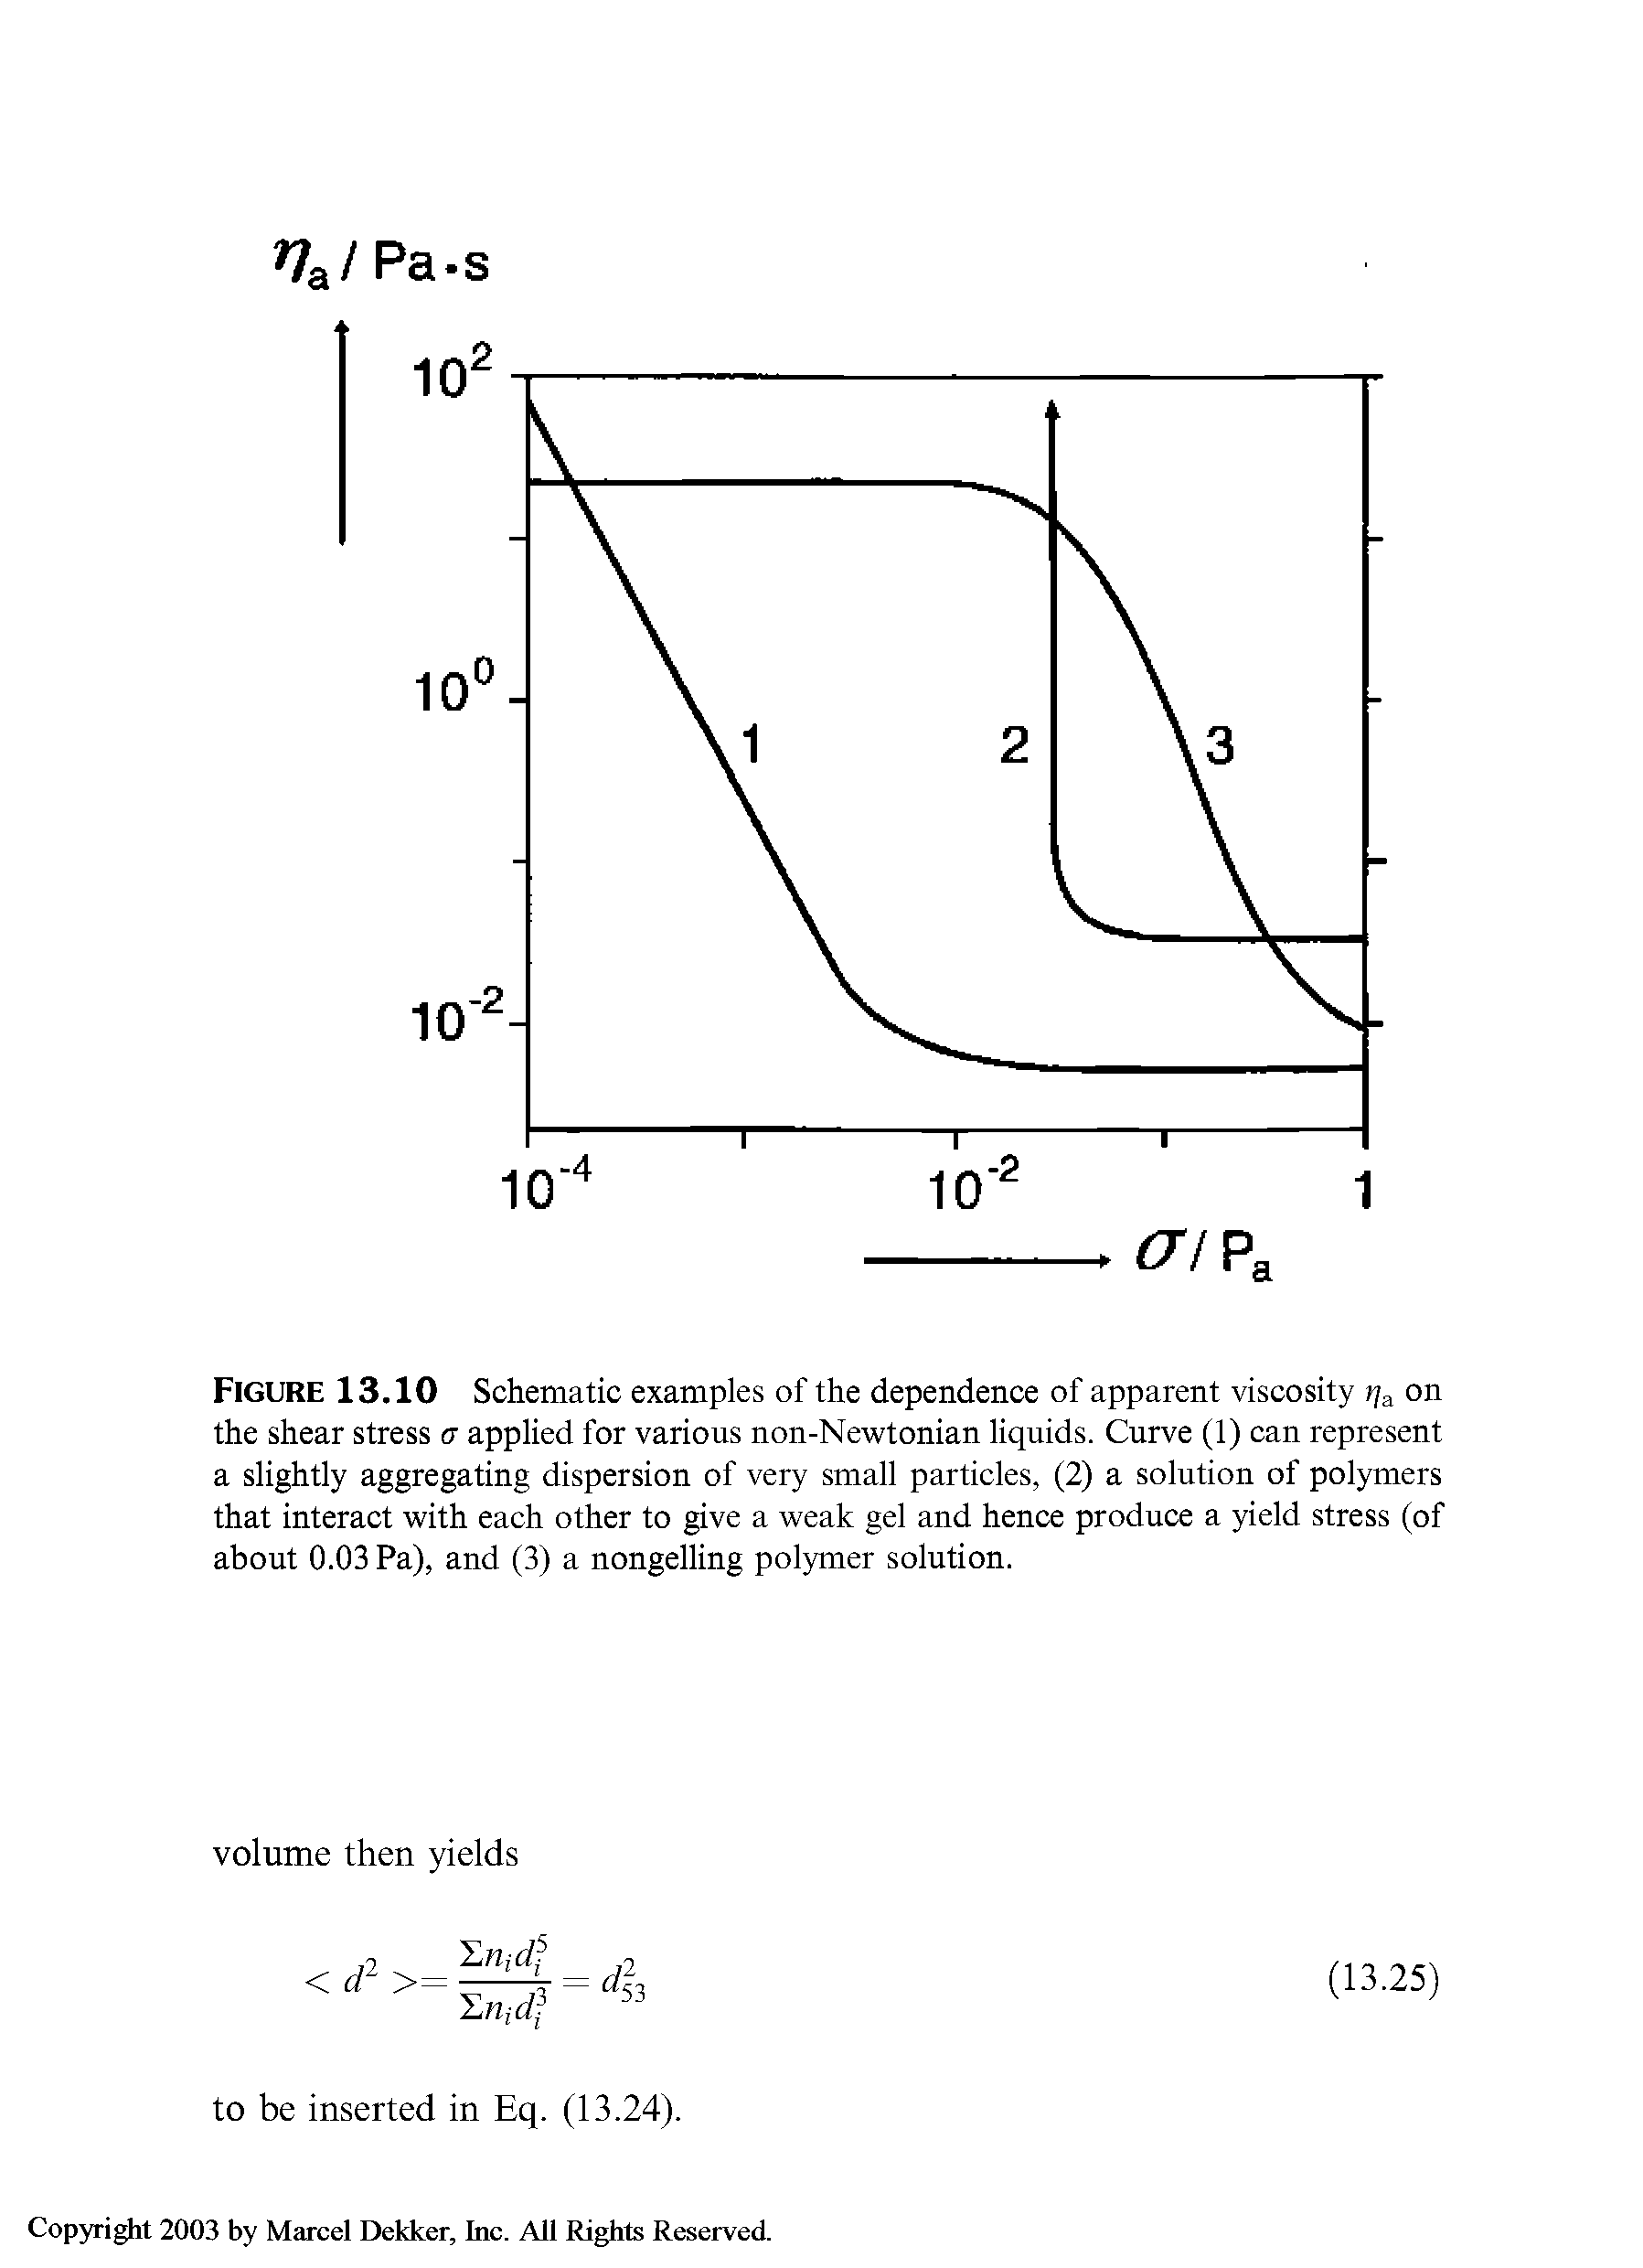 Figure 13.10 Schematic examples of the dependence of apparent viscosity >/a on the shear stress a applied for various non-Newtonian liquids. Curve (1) can represent a slightly aggregating dispersion of very small particles, (2) a solution of polymers that interact with each other to give a weak gel and hence produce a yield stress (of about 0.03 Pa), and (3) a nongelling polymer solution.